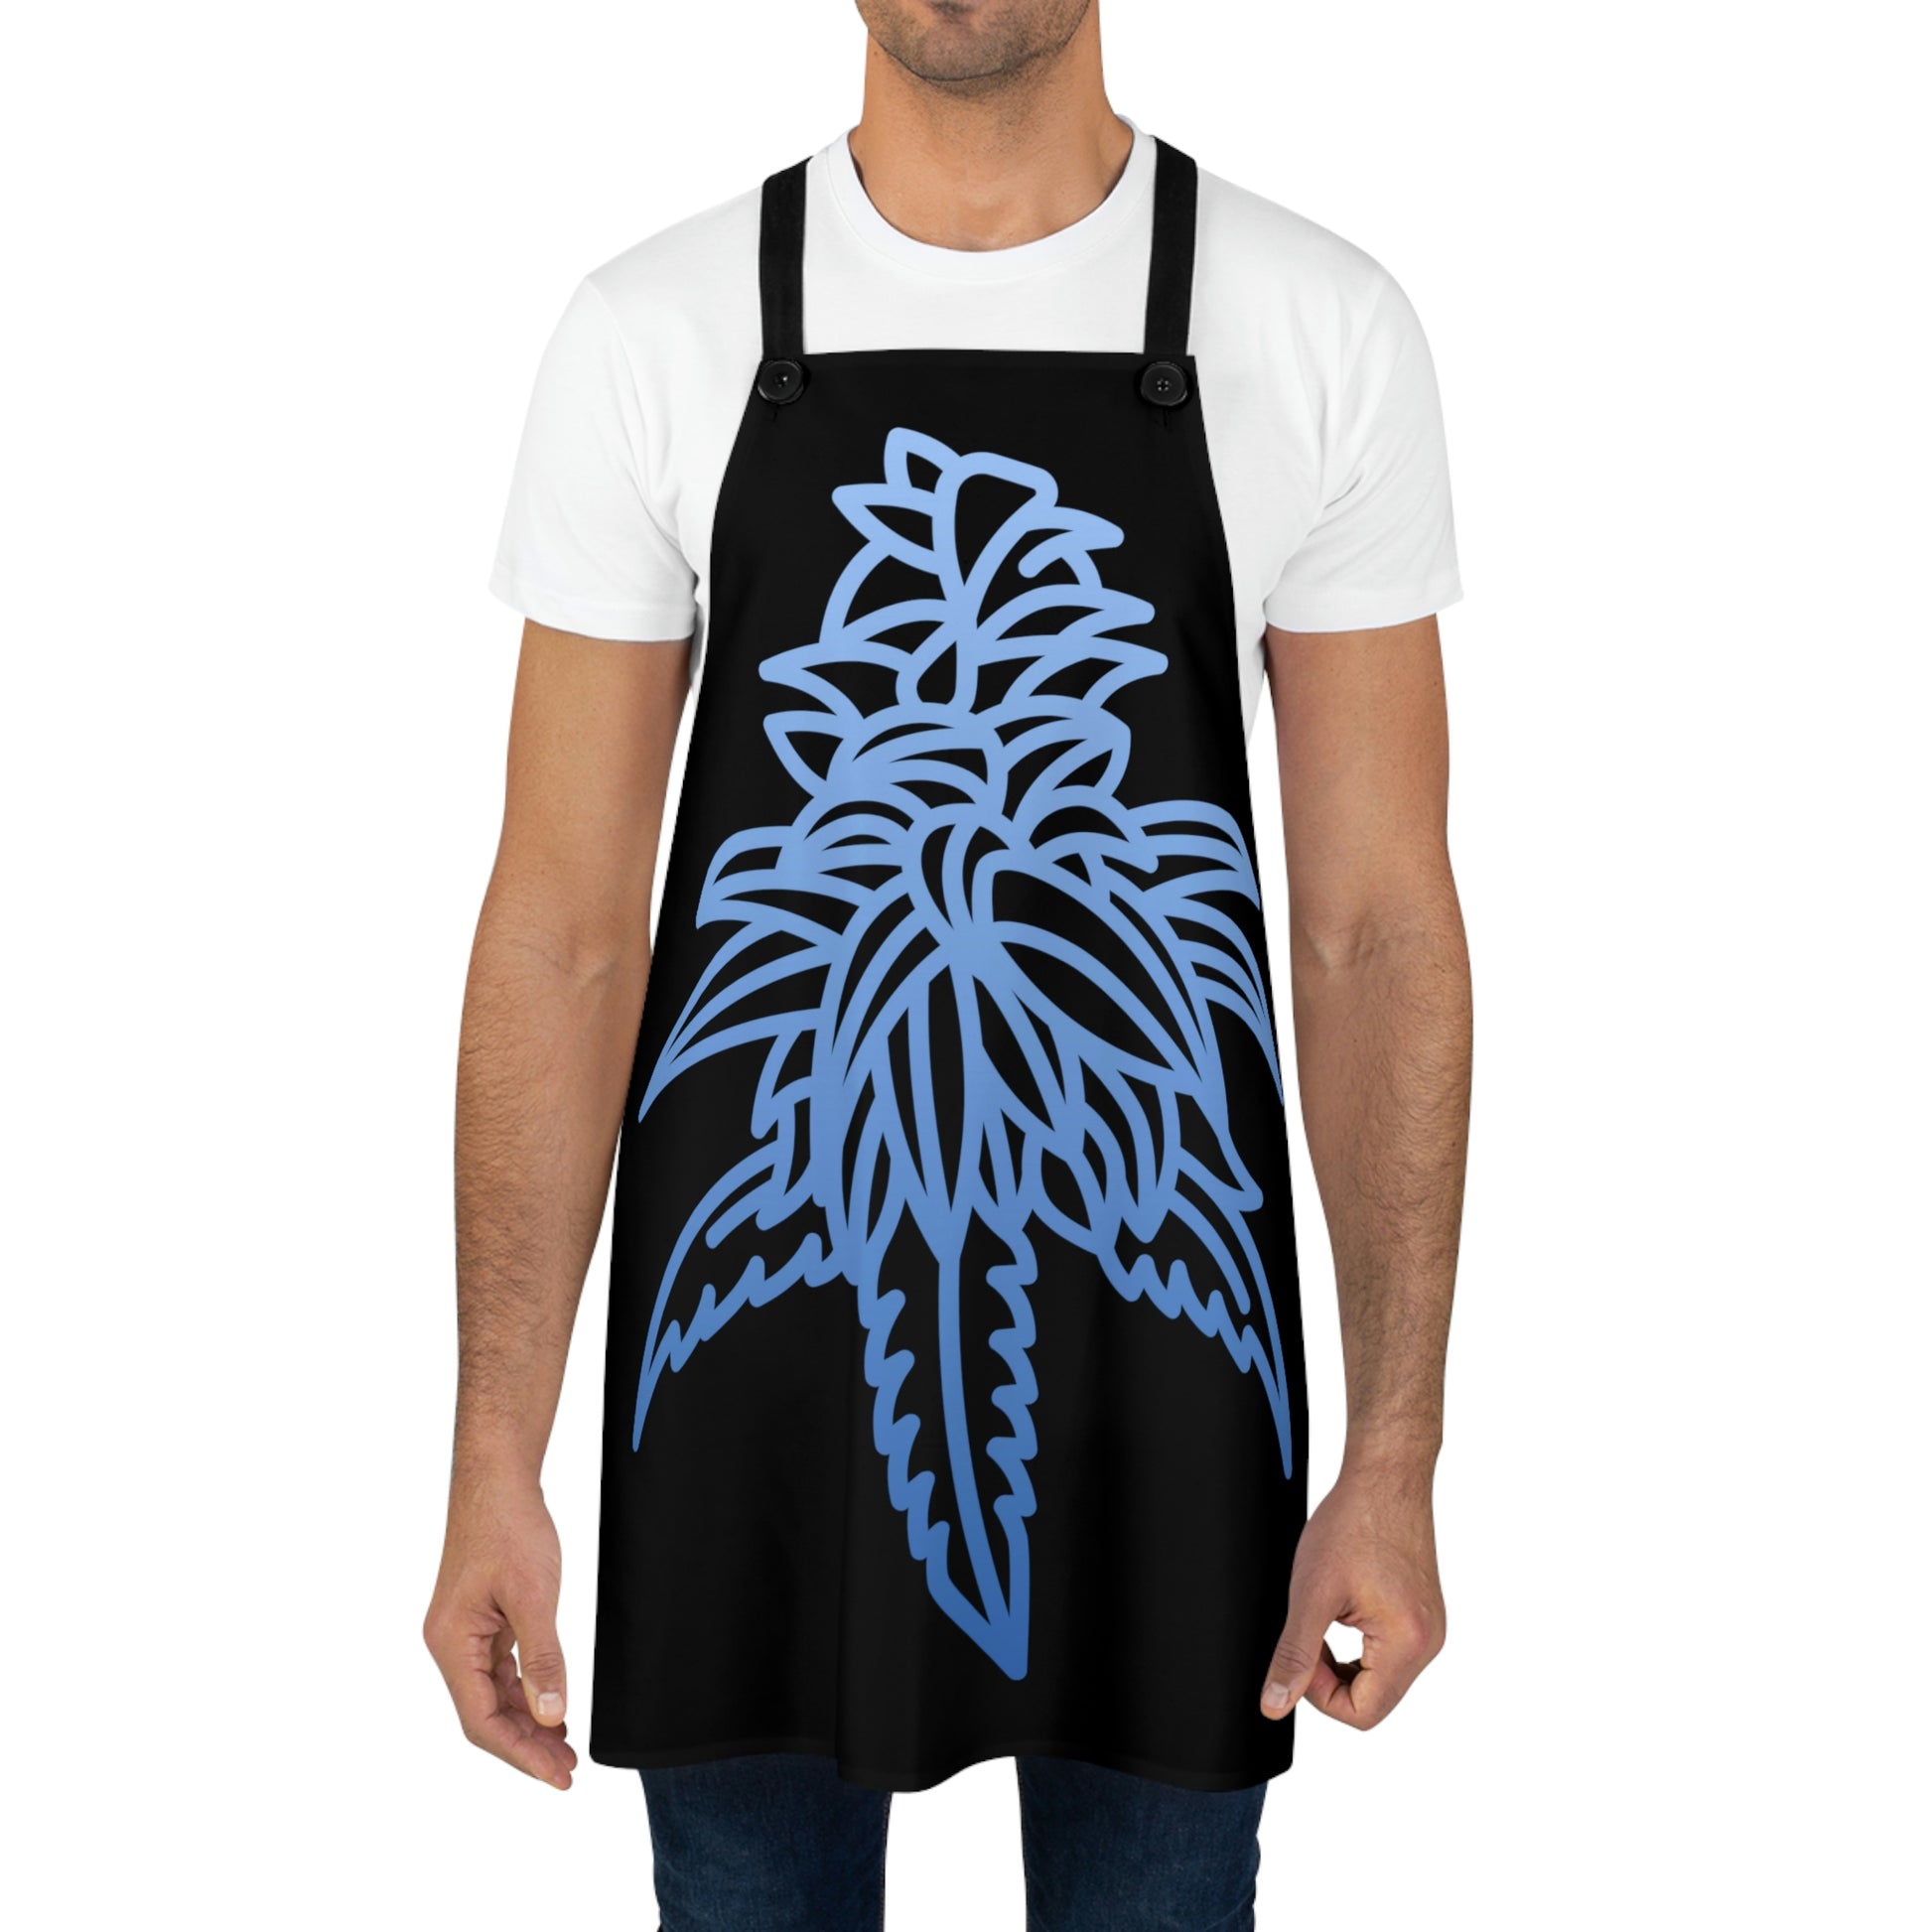 A man stands readily in the Blue Dream Cannabis Chef's Apron